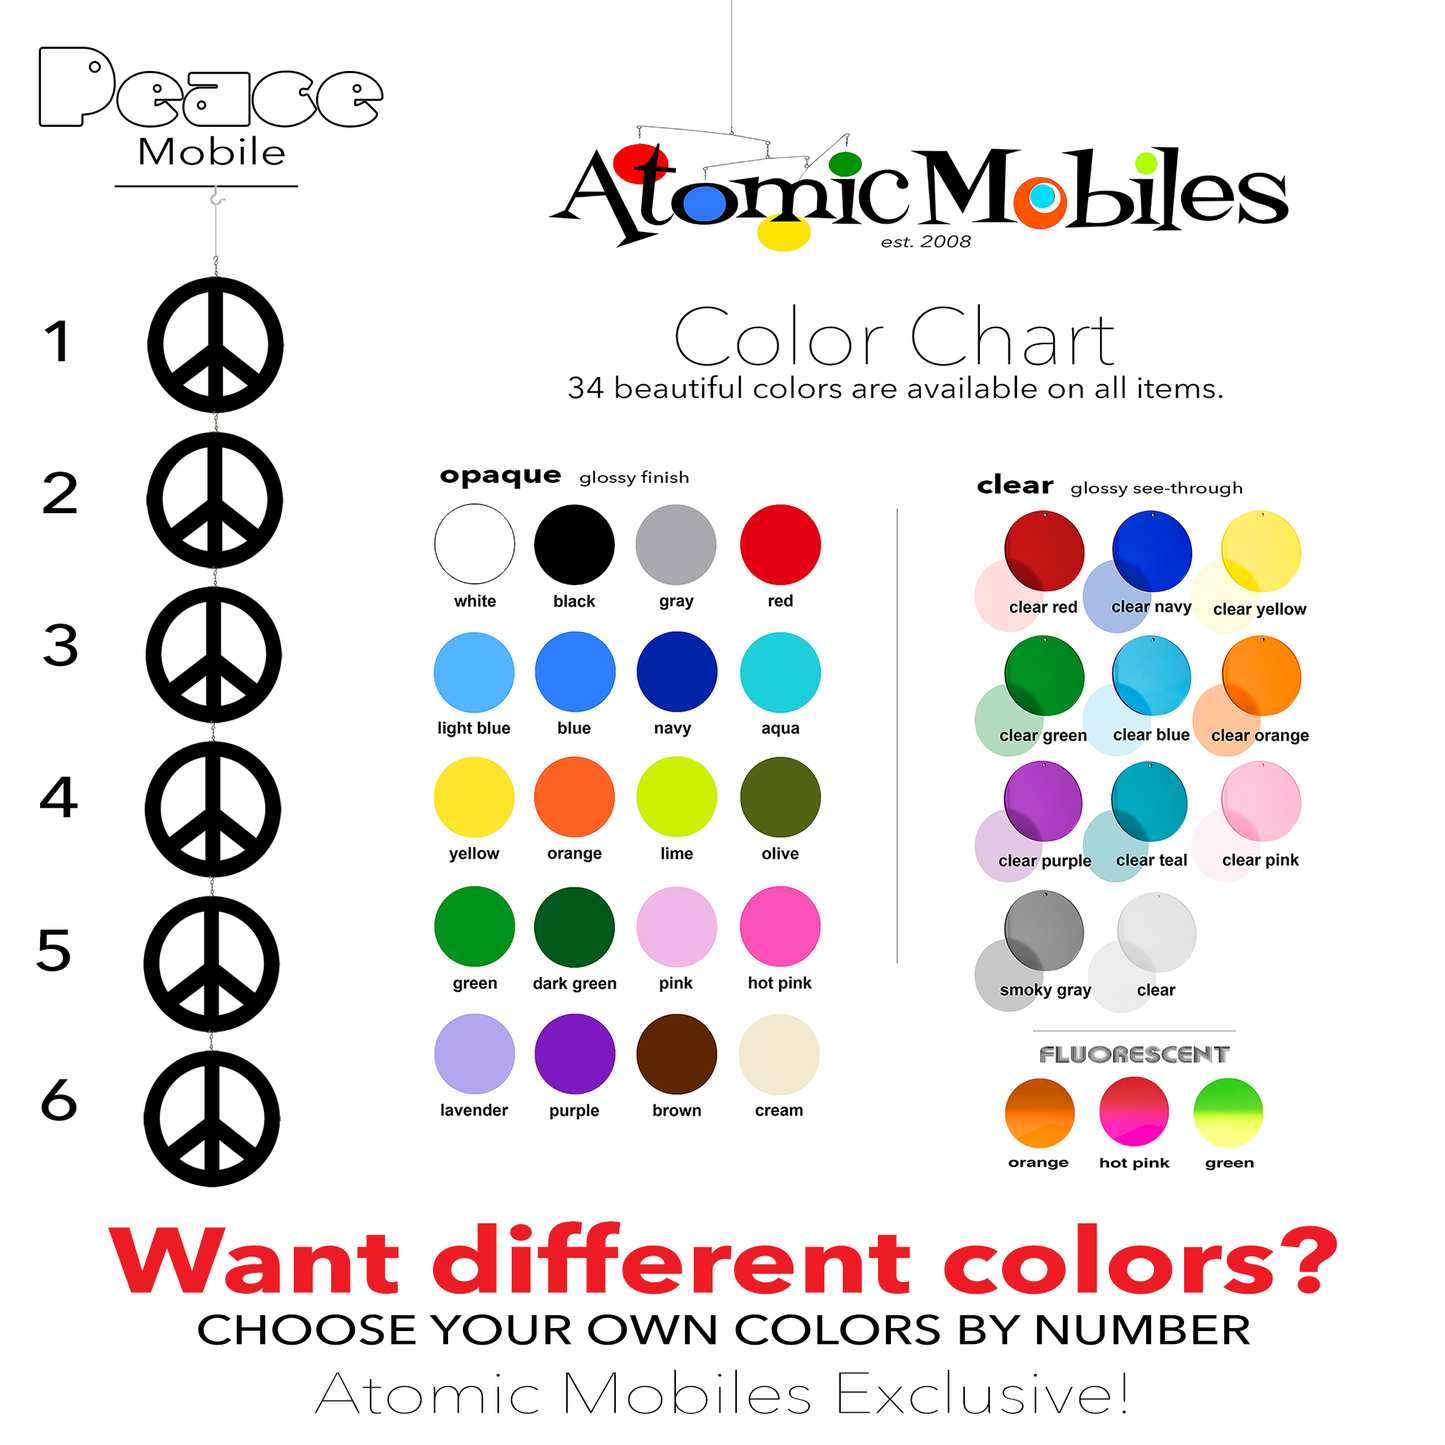 Custom Color Chart for Peace Sign kinietic hanging art mobile by AtomicMobiles.com - symbolizing World Peace